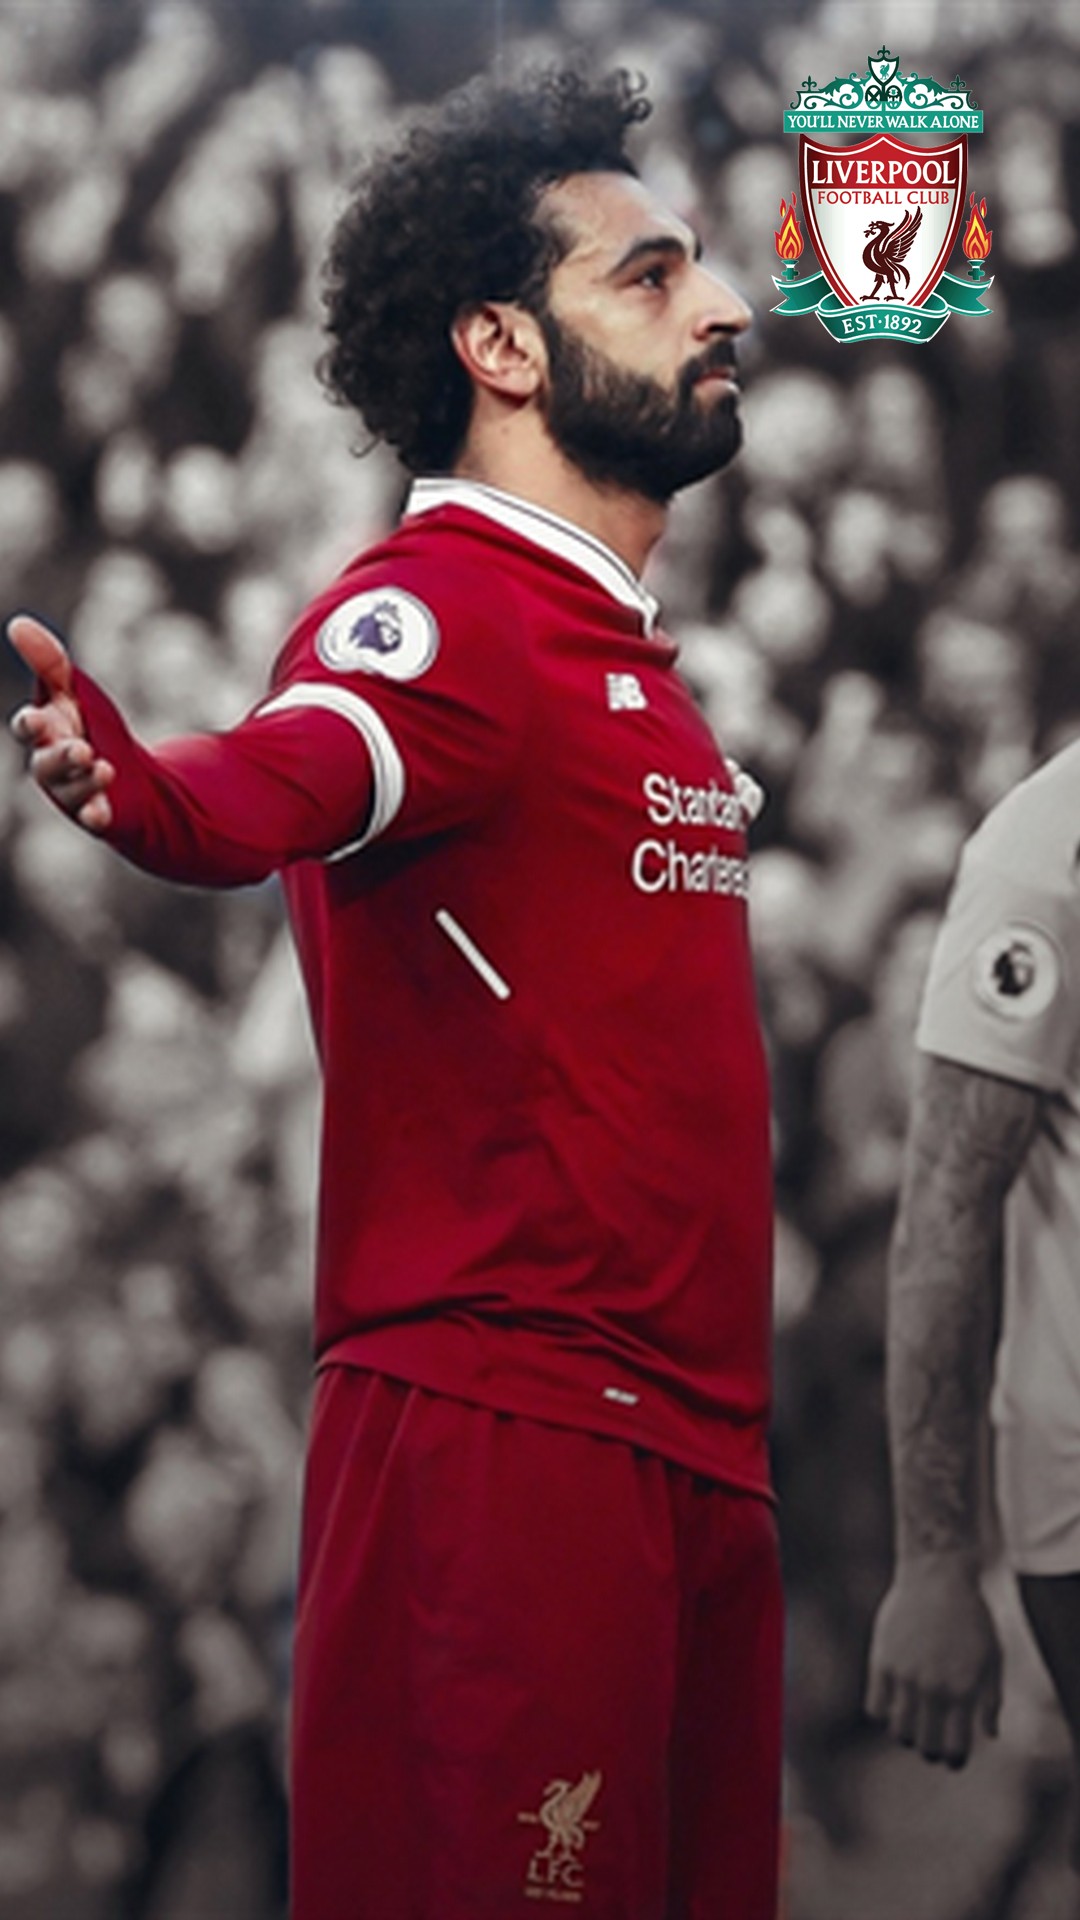 Wallpaper Salah Liverpool Android with image resolution 1080x1920 pixel. You can make this wallpaper for your Android backgrounds, Tablet, Smartphones Screensavers and Mobile Phone Lock Screen